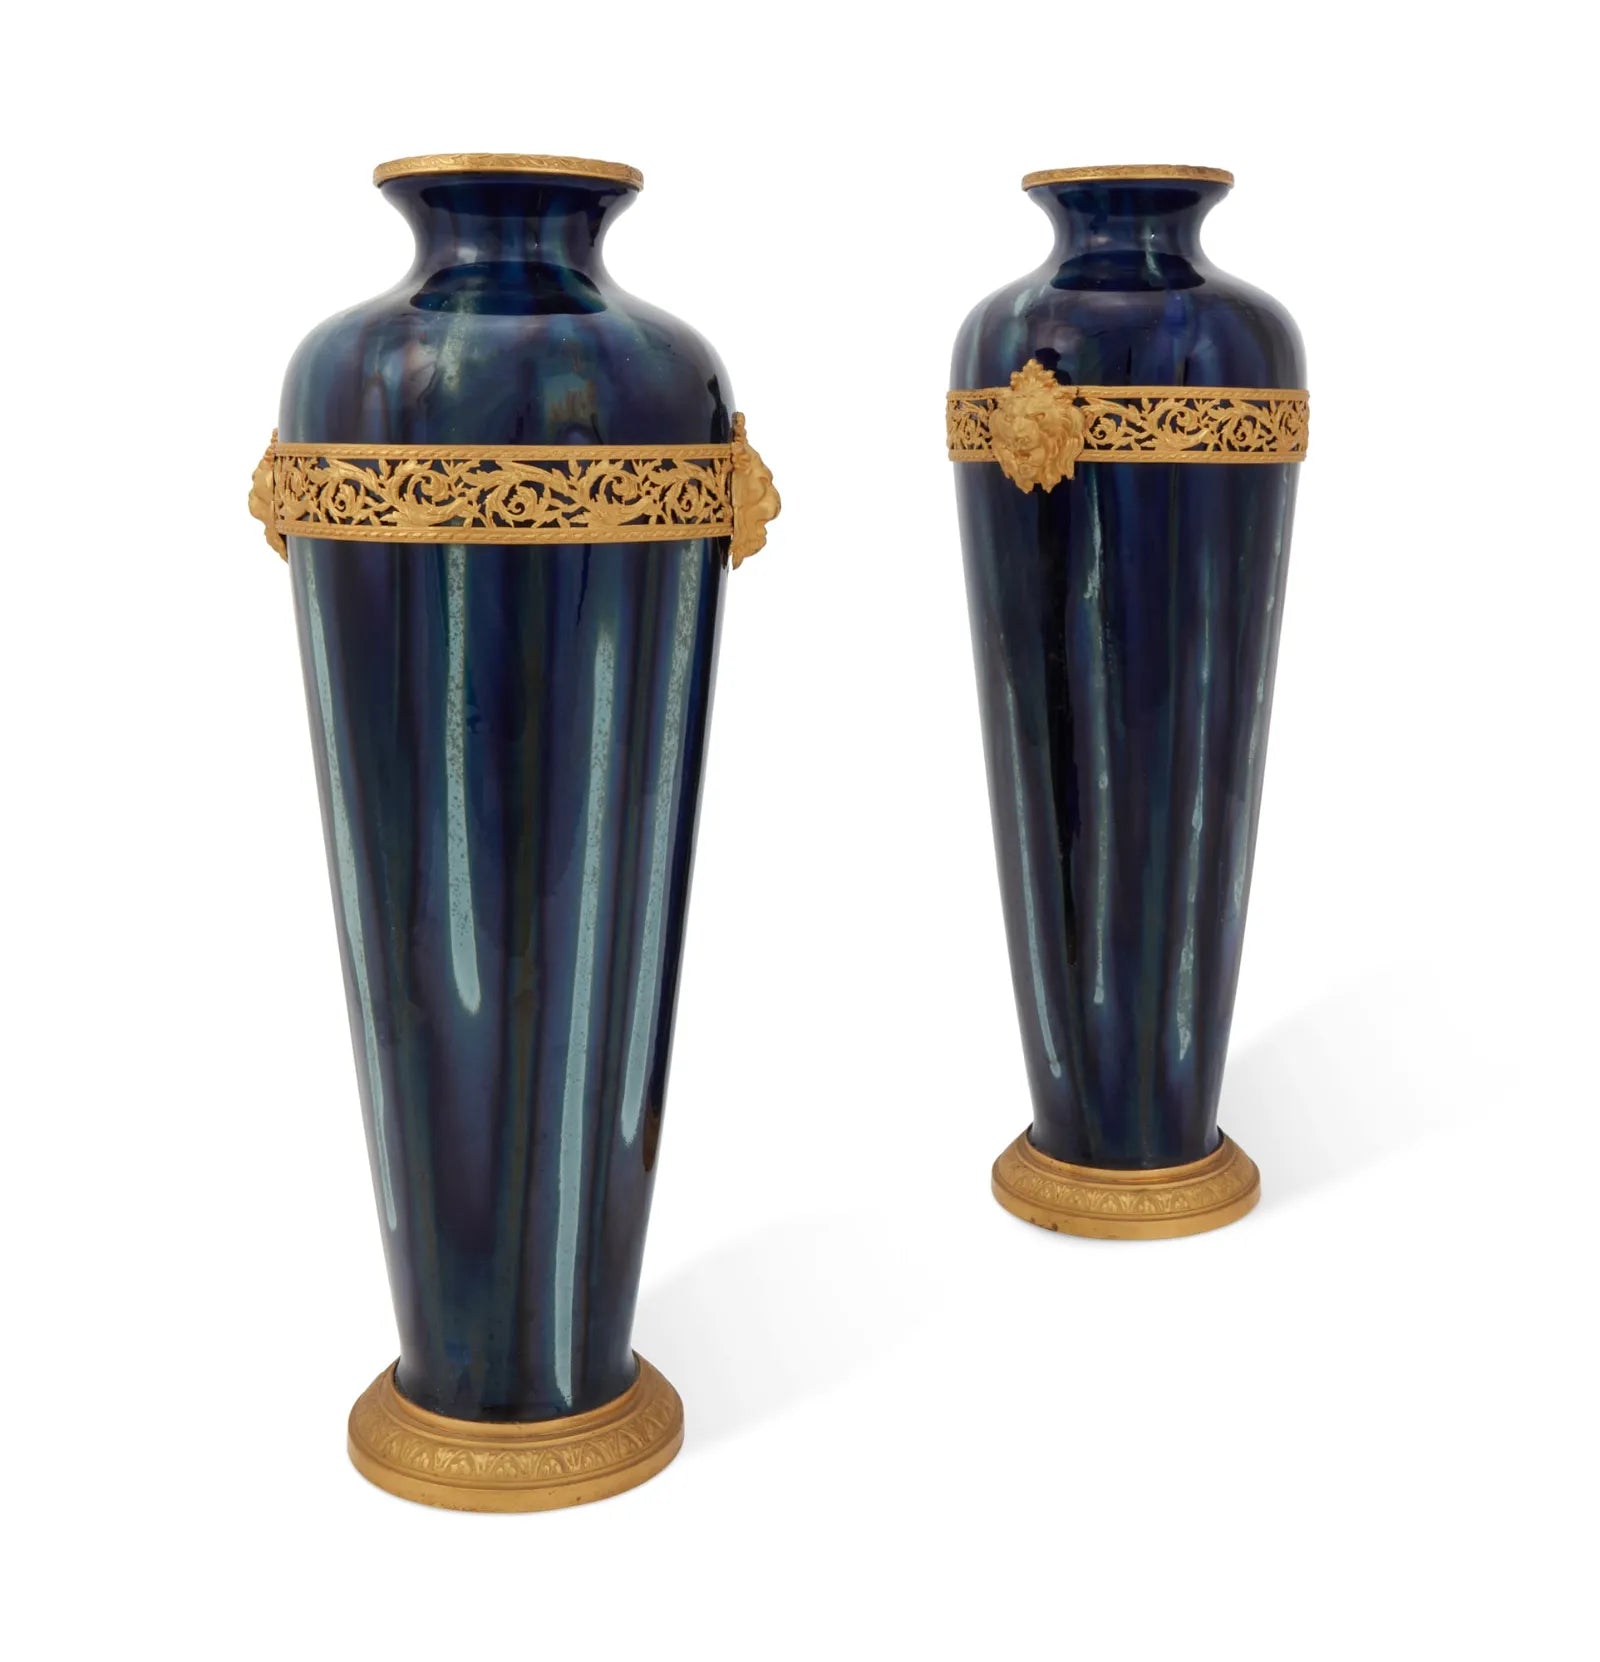 DA5-015: Pair of Late 19th C Pair of French Cobalt Flambe Glazed Pottery Vases w/ Gilt Bronze Mounts